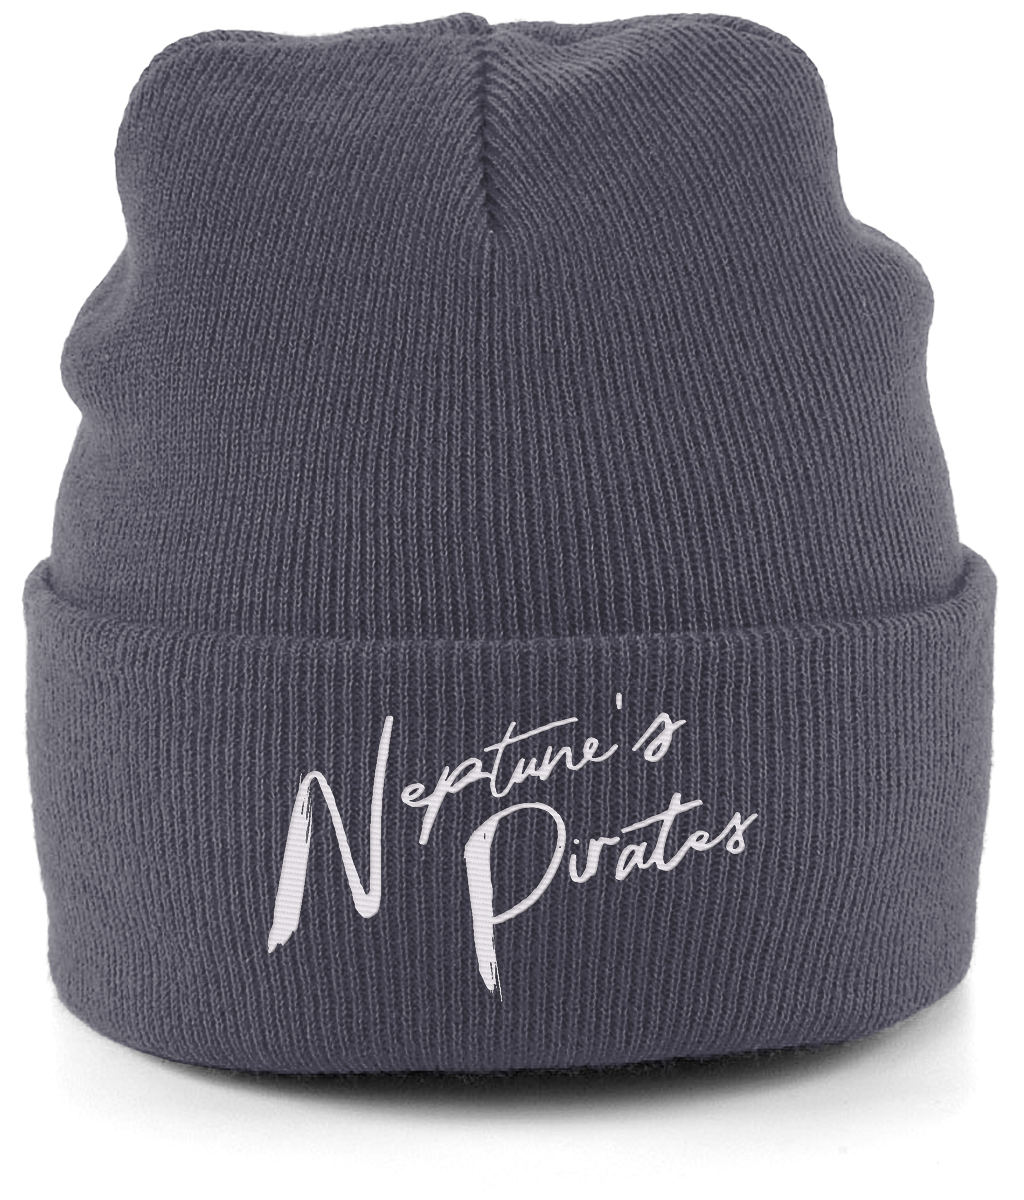 Neptune's Pirates Text Embroidered Beanie - Captain Paul Watson Foundation (t/a Neptune's Pirates)